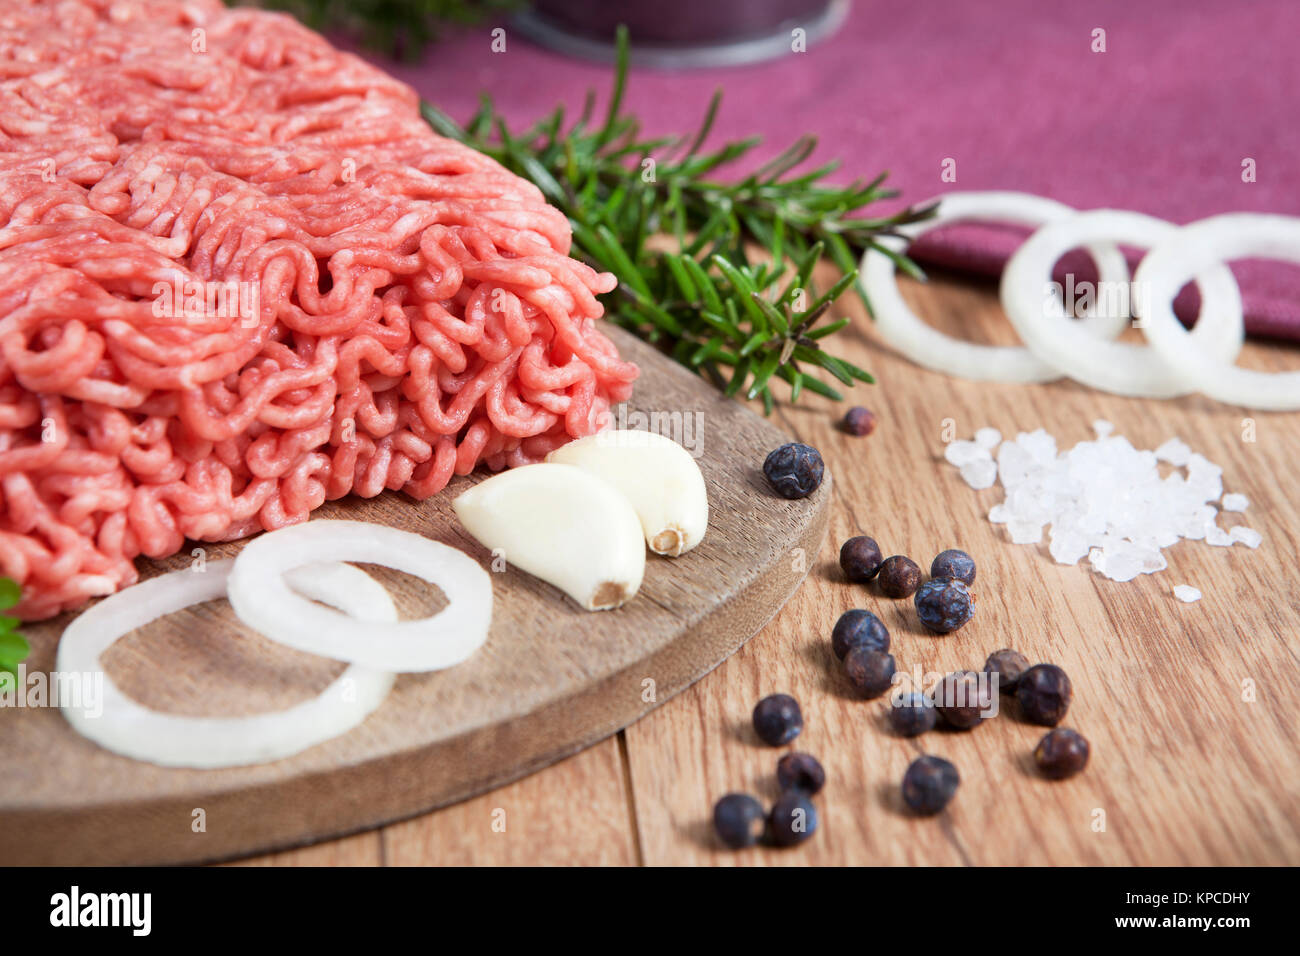 raw minced meat Stock Photo